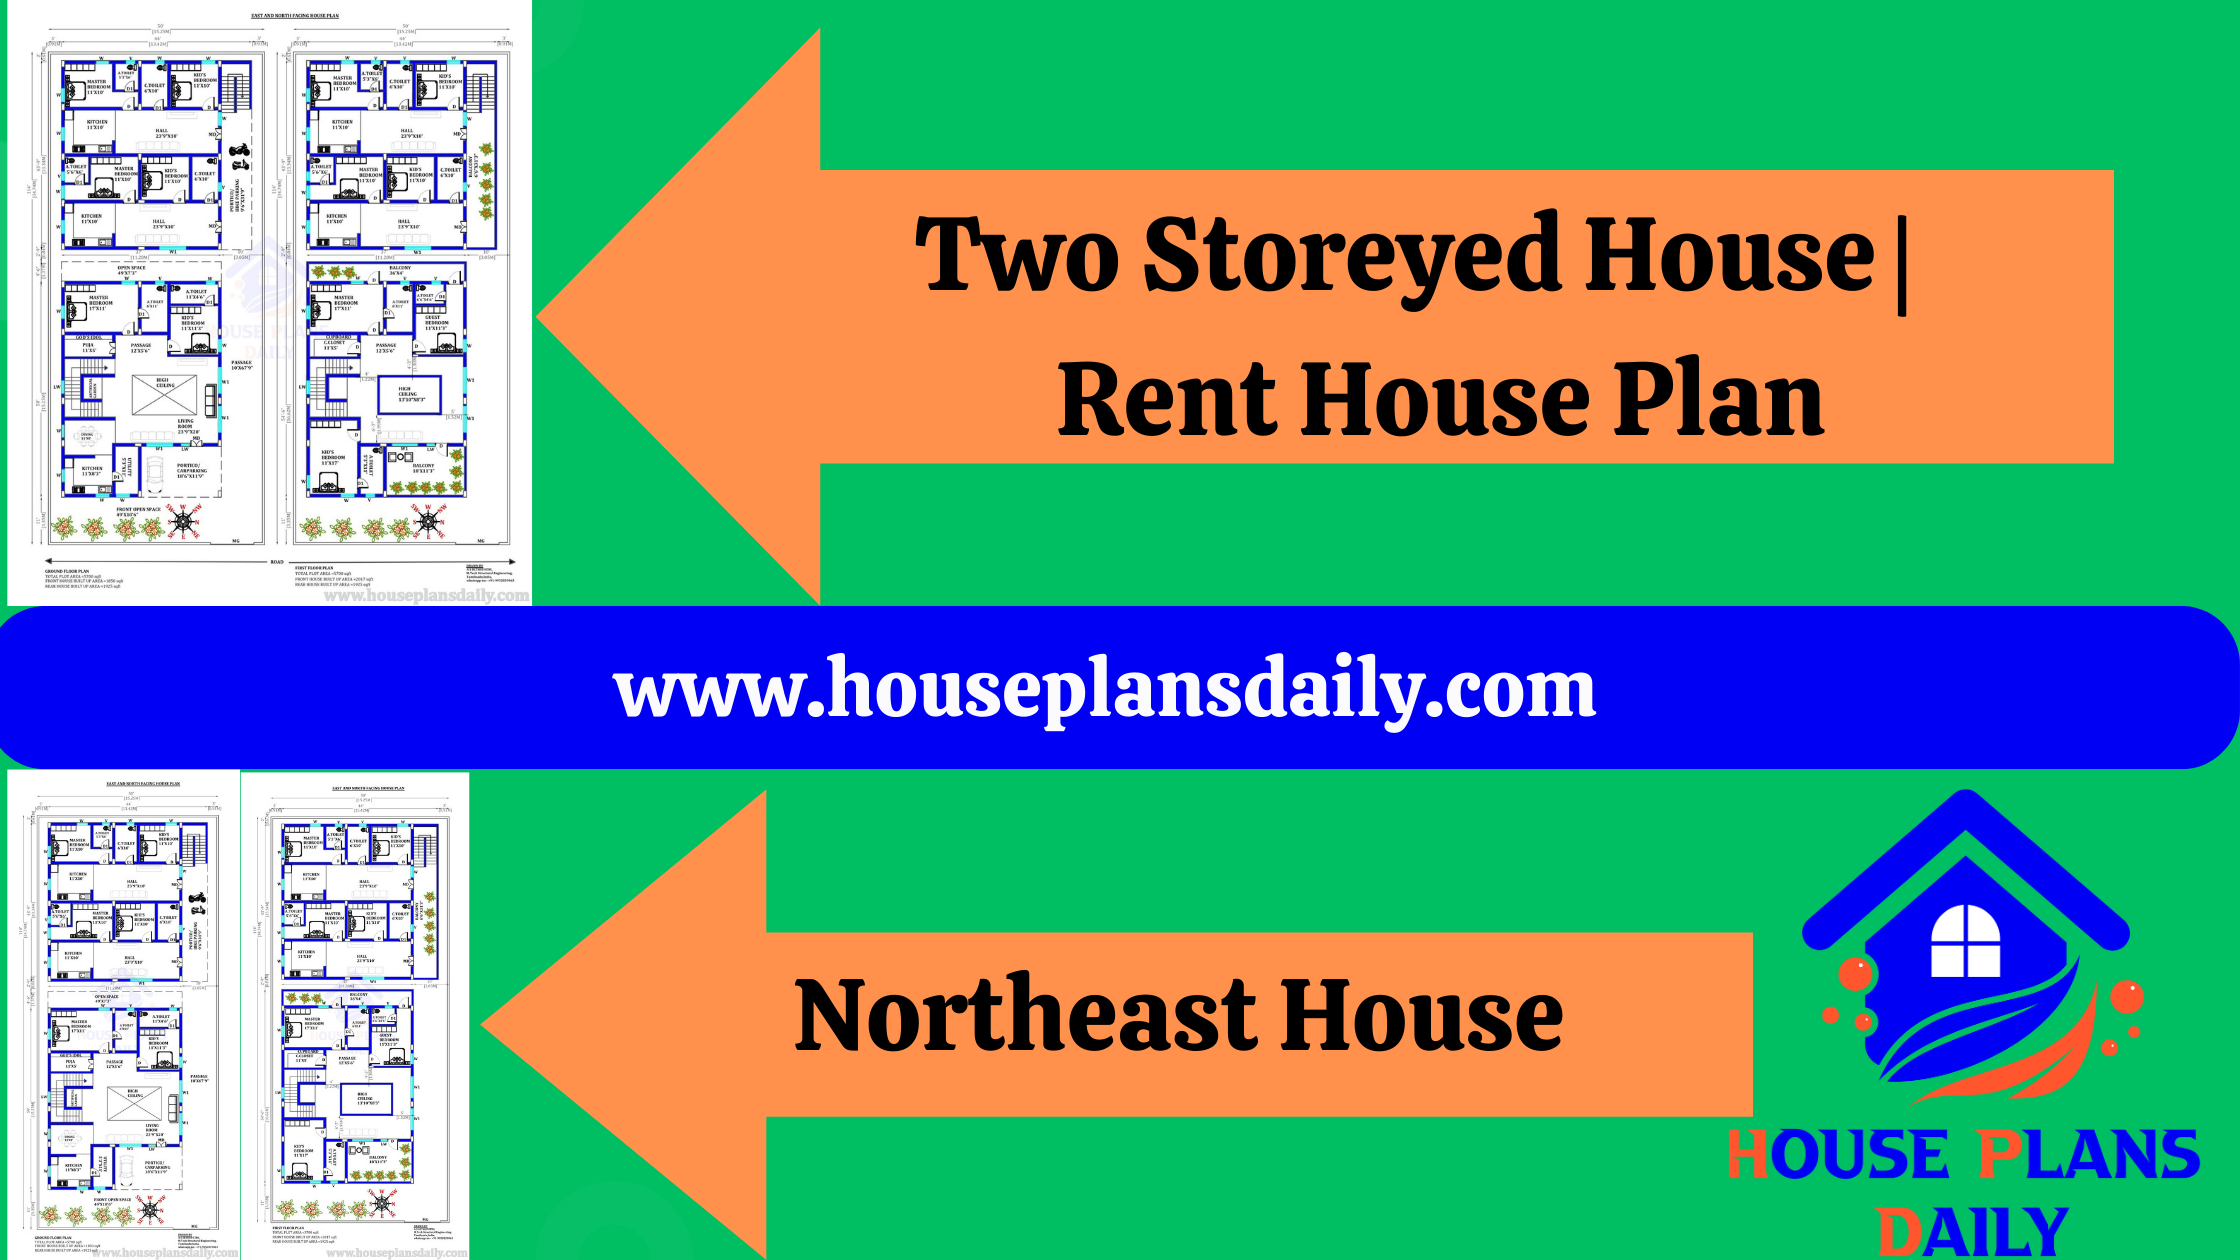 Two Storeyed House | Northeast House | Rent House Plan